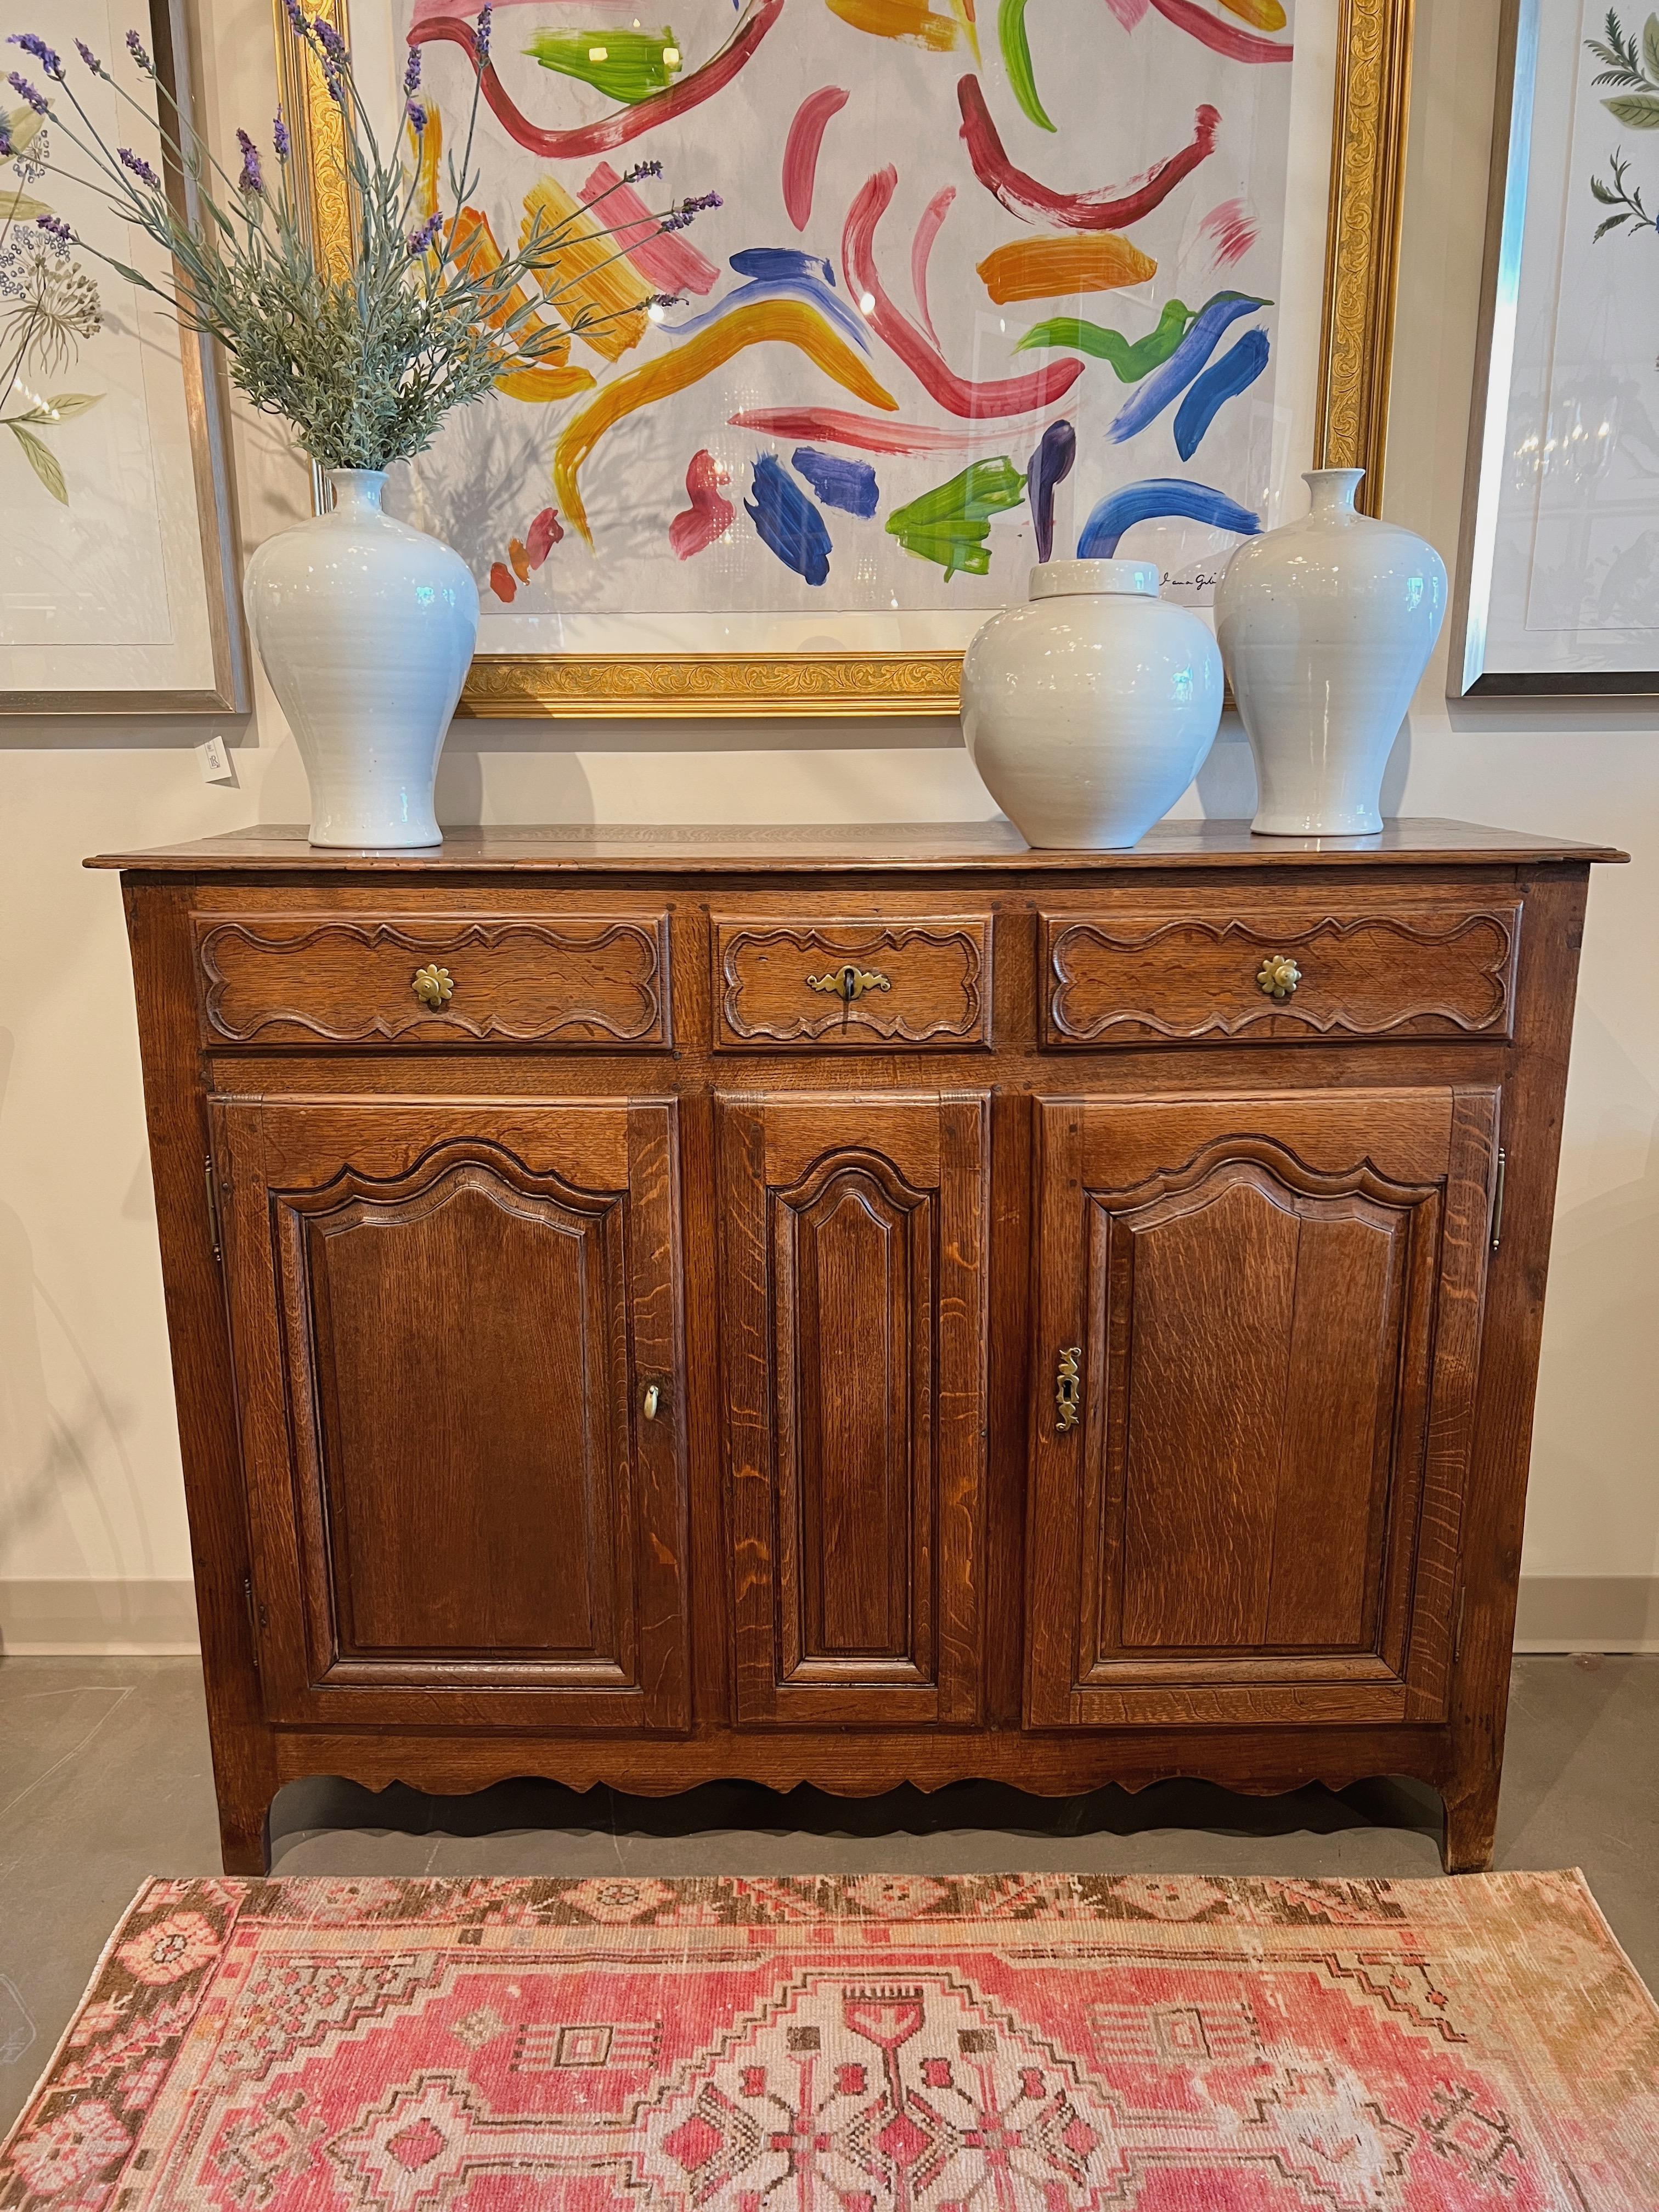 Circa mid 19th century France.

This handsome antique French buffet features a molded edge plank top above three drawers with beautiful carved faces. The outer drawers have floral brass knobs and the center drawer has a non-functioning lock & key.